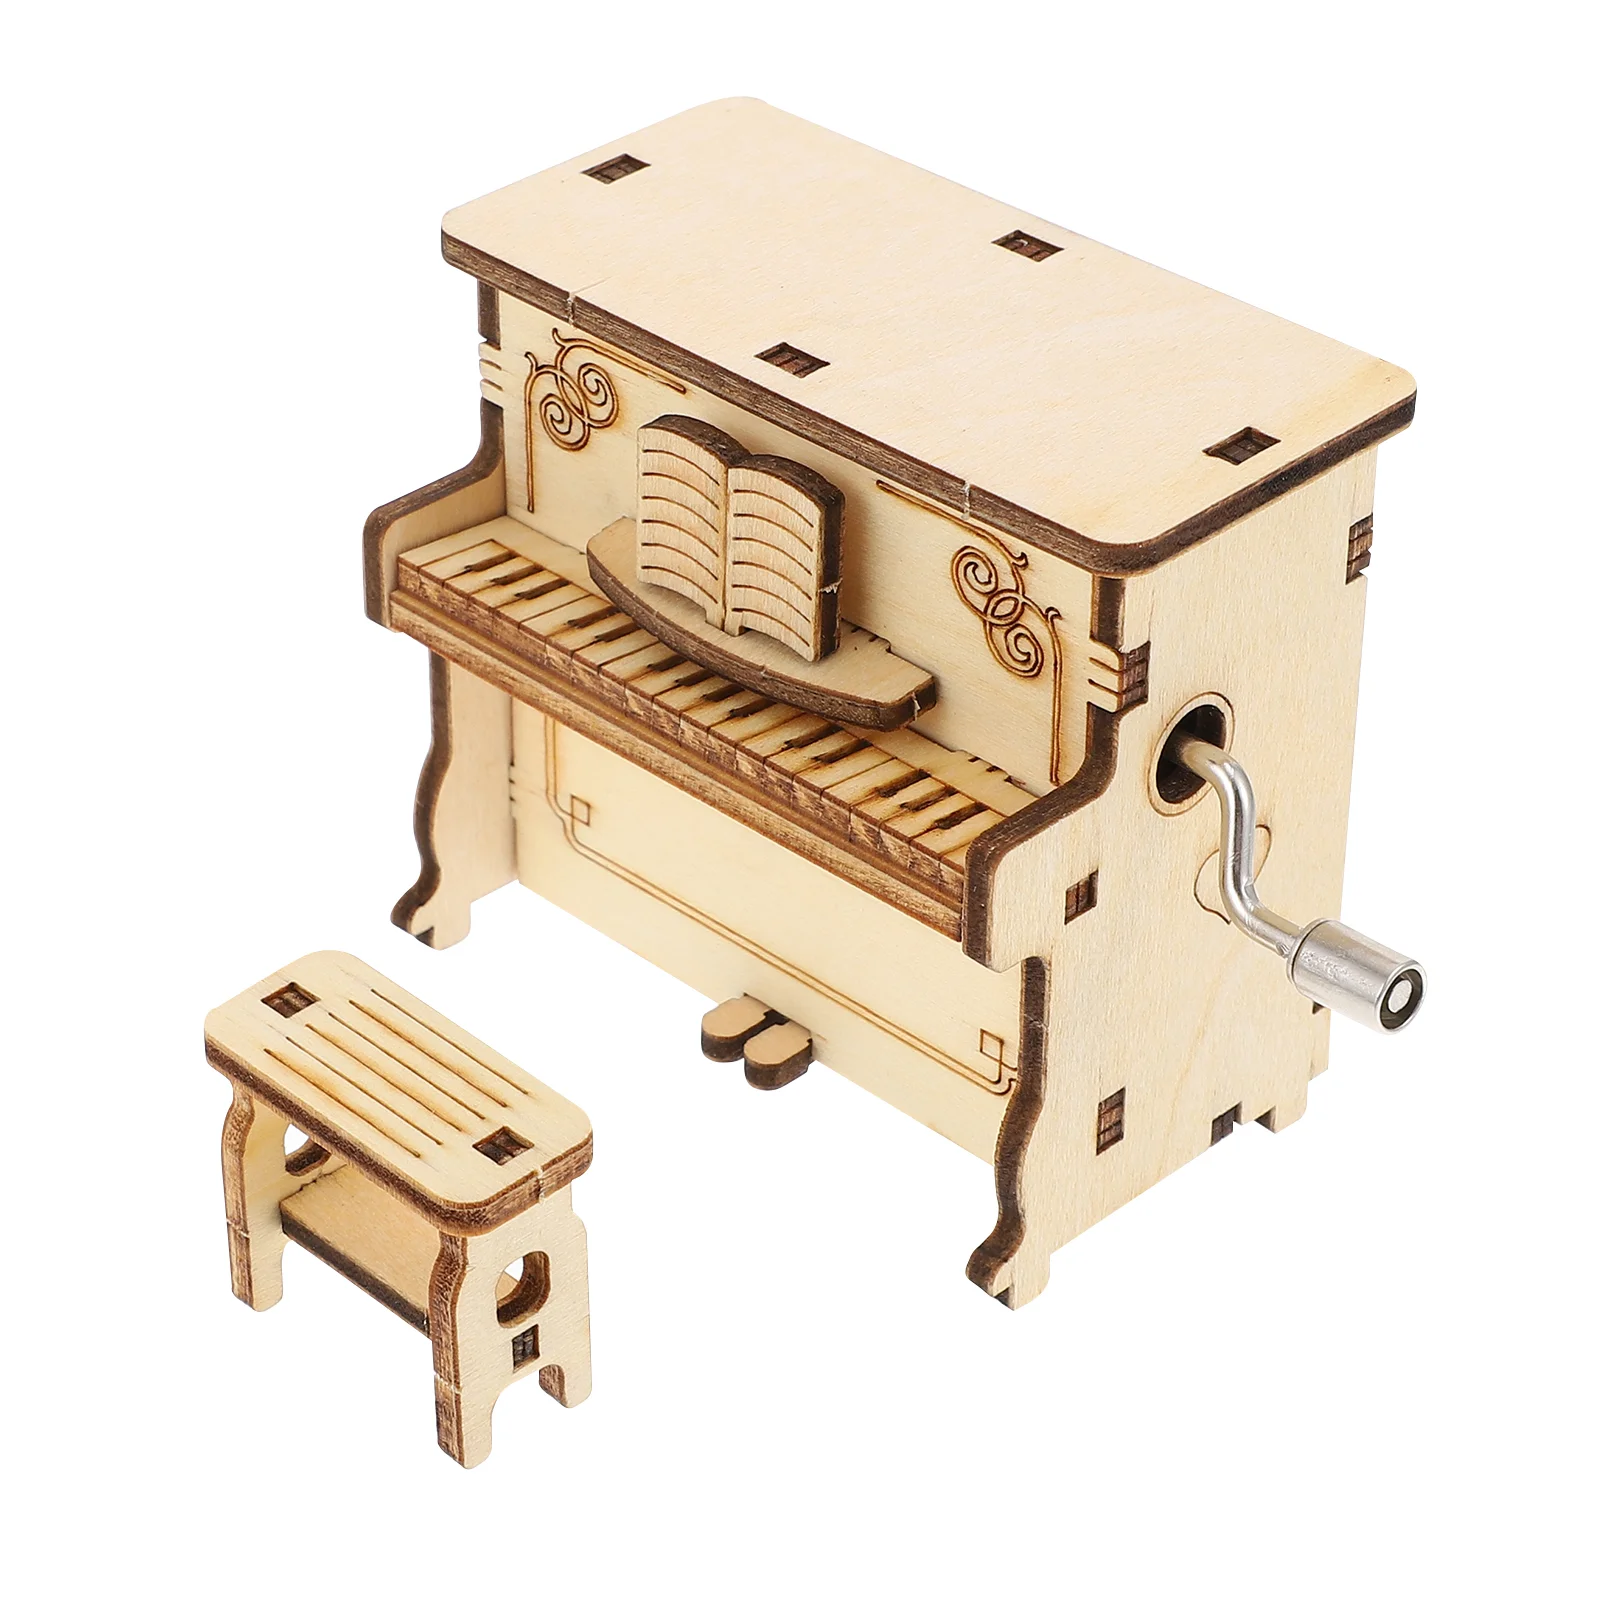 Model Piano Music Box Child Wooden Puzzle Adults Mechanical Puzzles Educational Plaything weird medieval bestiary making music cat playing organ harpist rabbit snail cat jigsaw puzzle personalized child gift puzzle